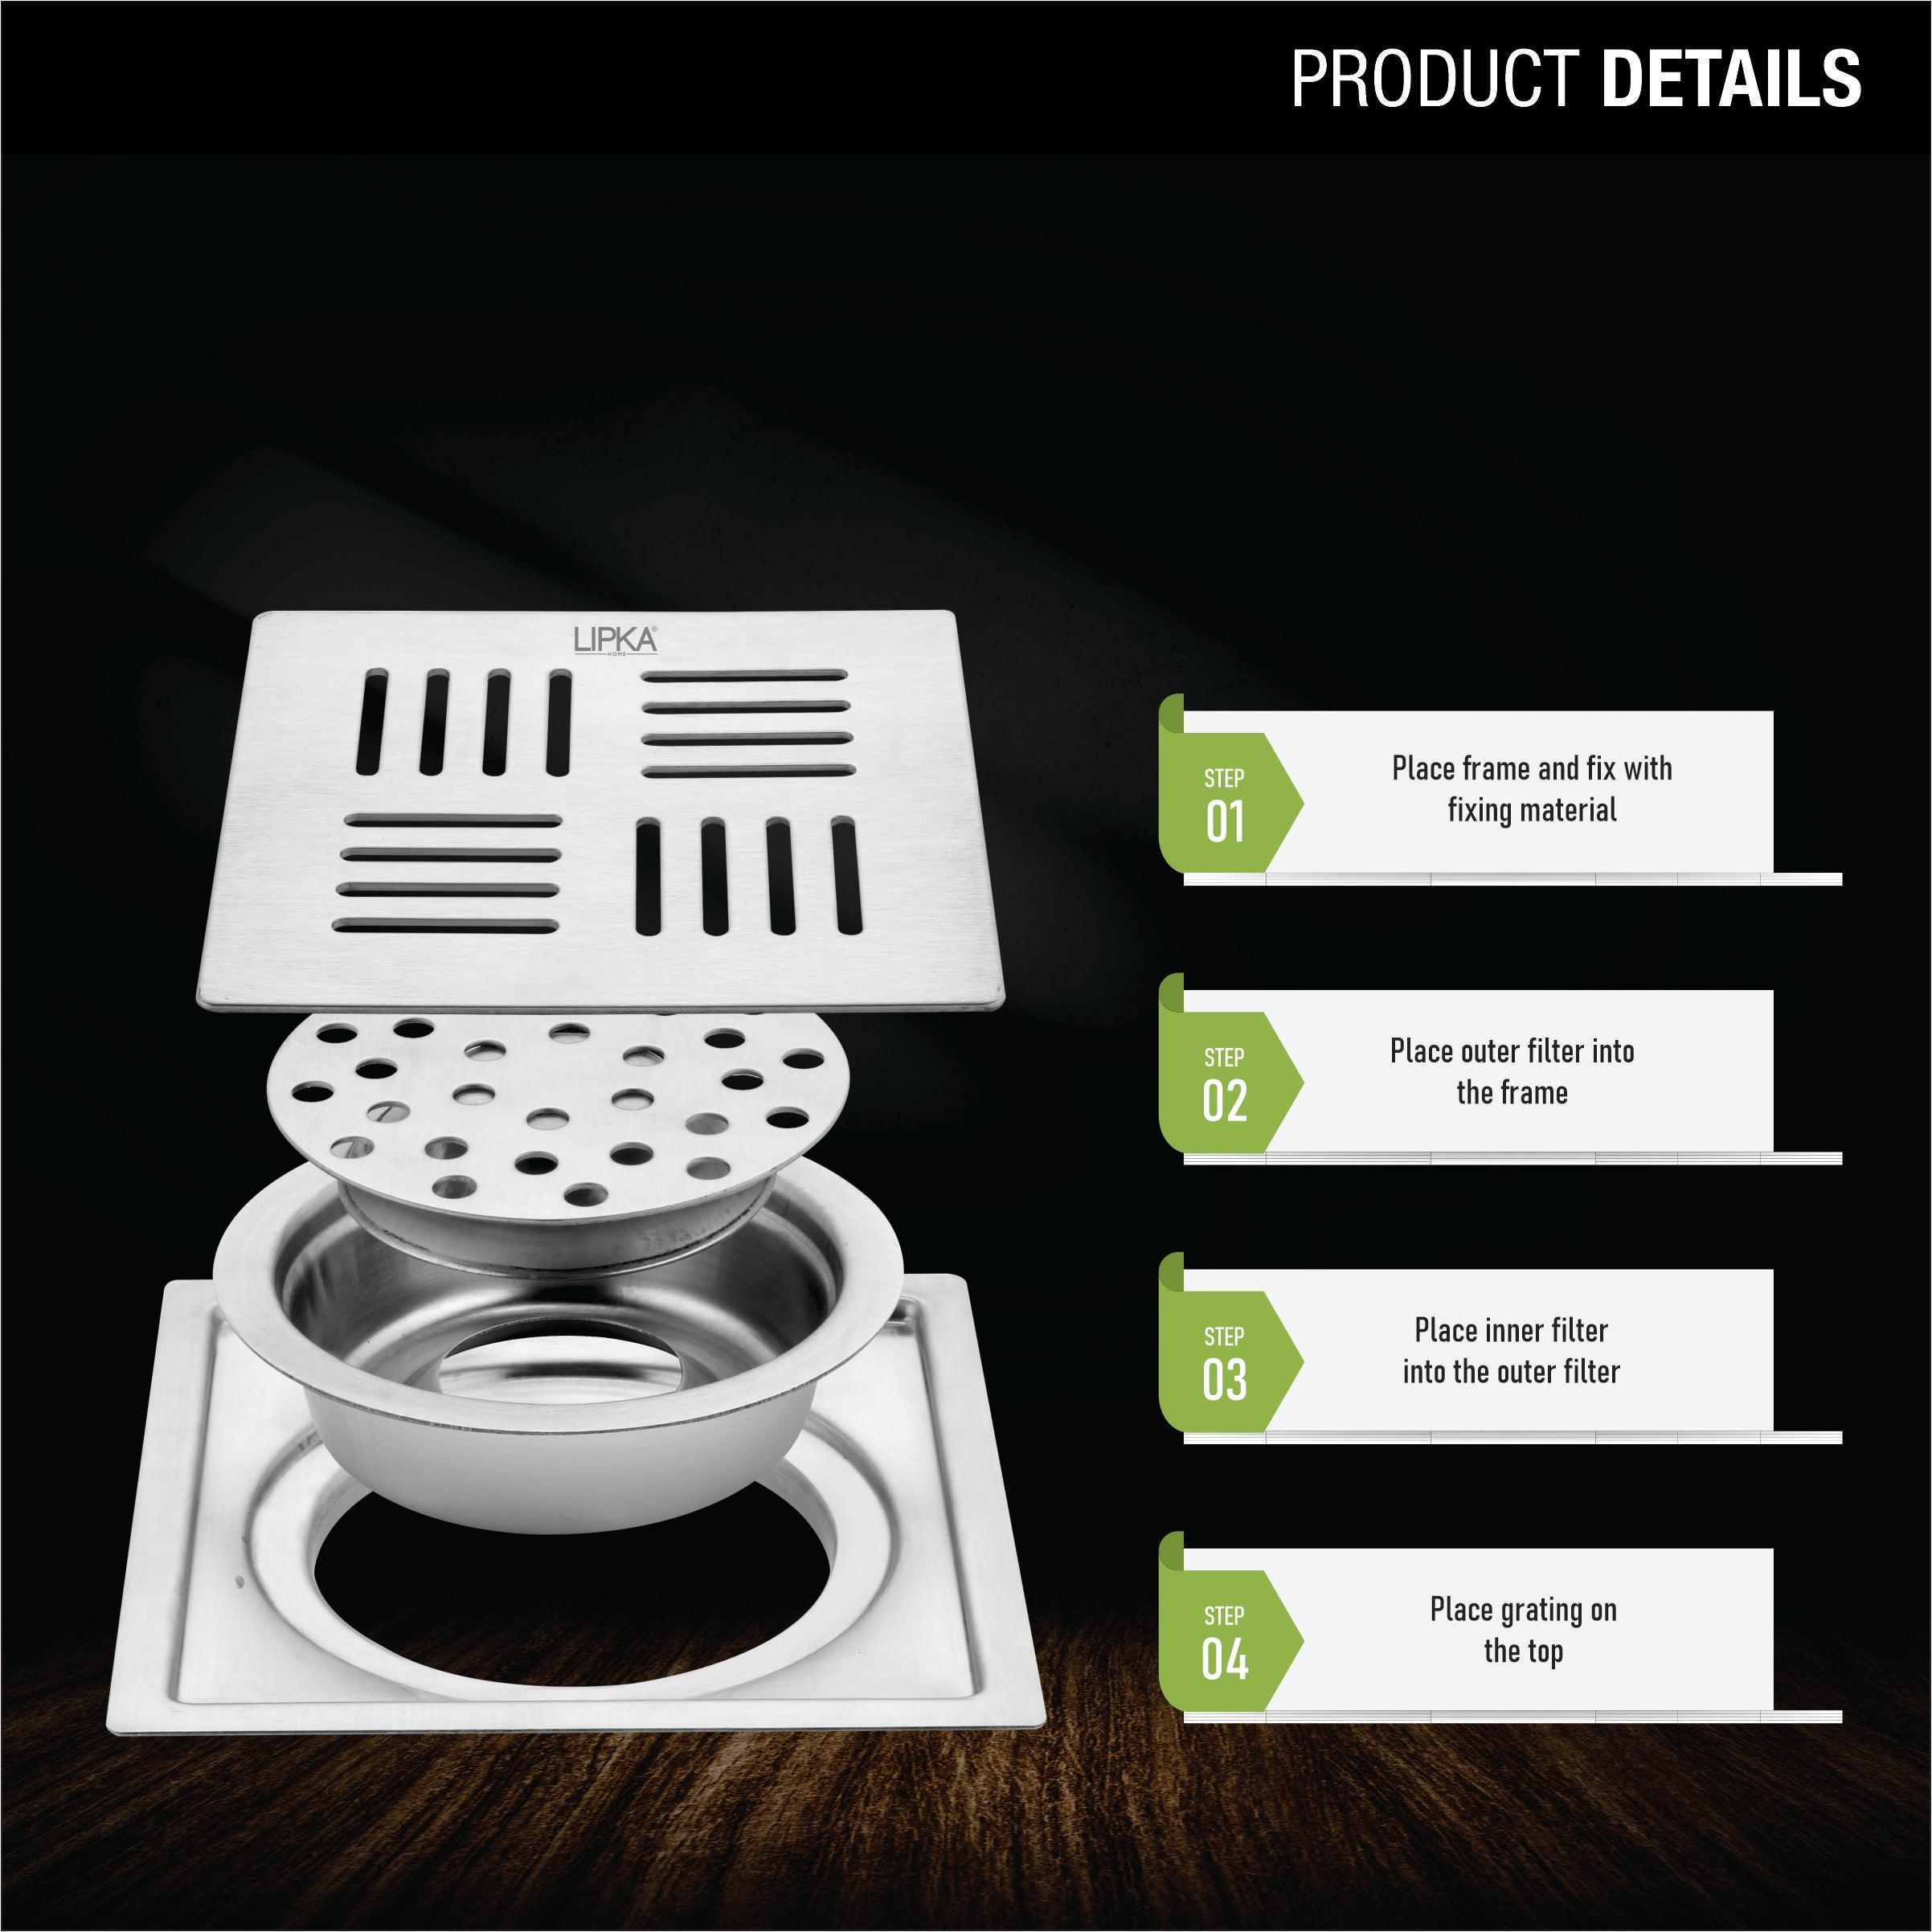 Pink Exclusive Square Flat Cut Floor Drain (5 x 5 Inches) with Cockroach Trap product details